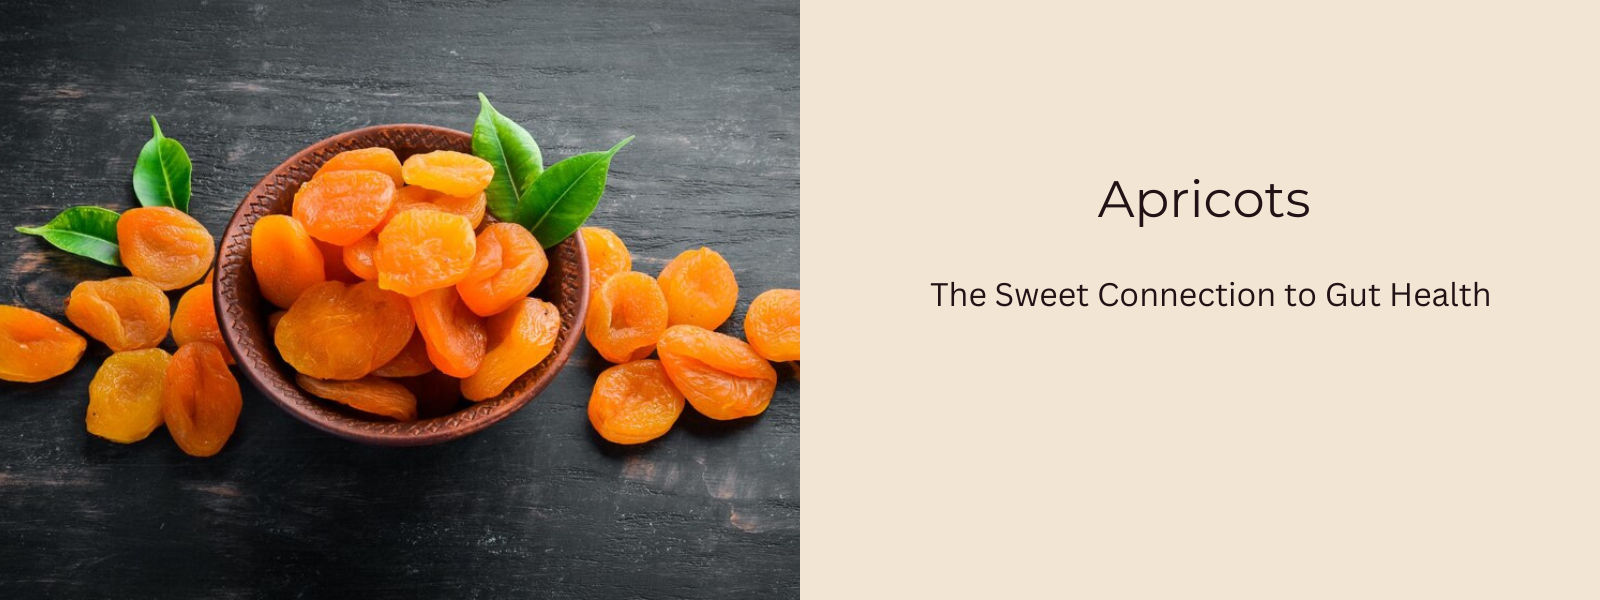 Apricots and Digestion: The Sweet Connection to Gut Health